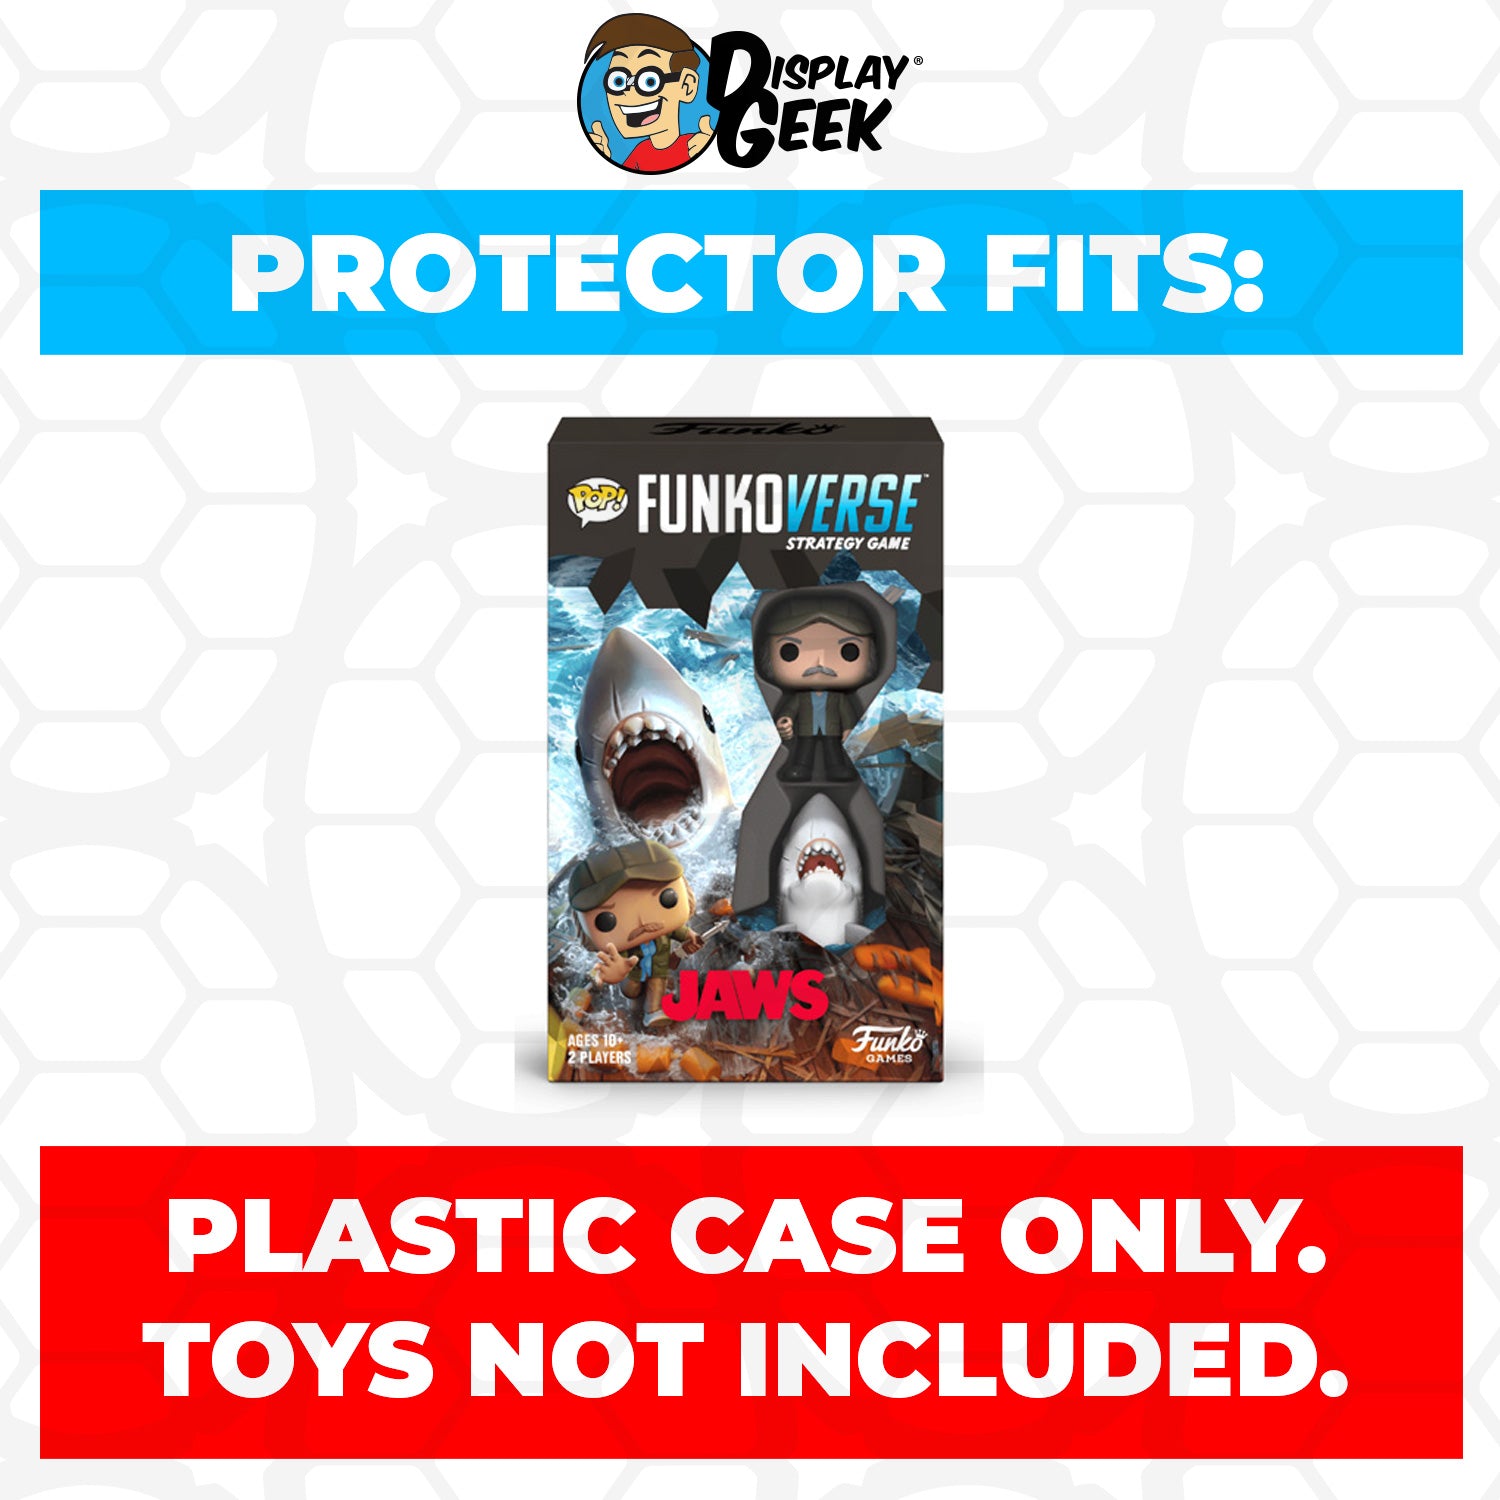 Pop Protector for Funkoverse Jaws 100 Funko 2 Pack - PPG Pop Protector Guide Search Created by Display Geek